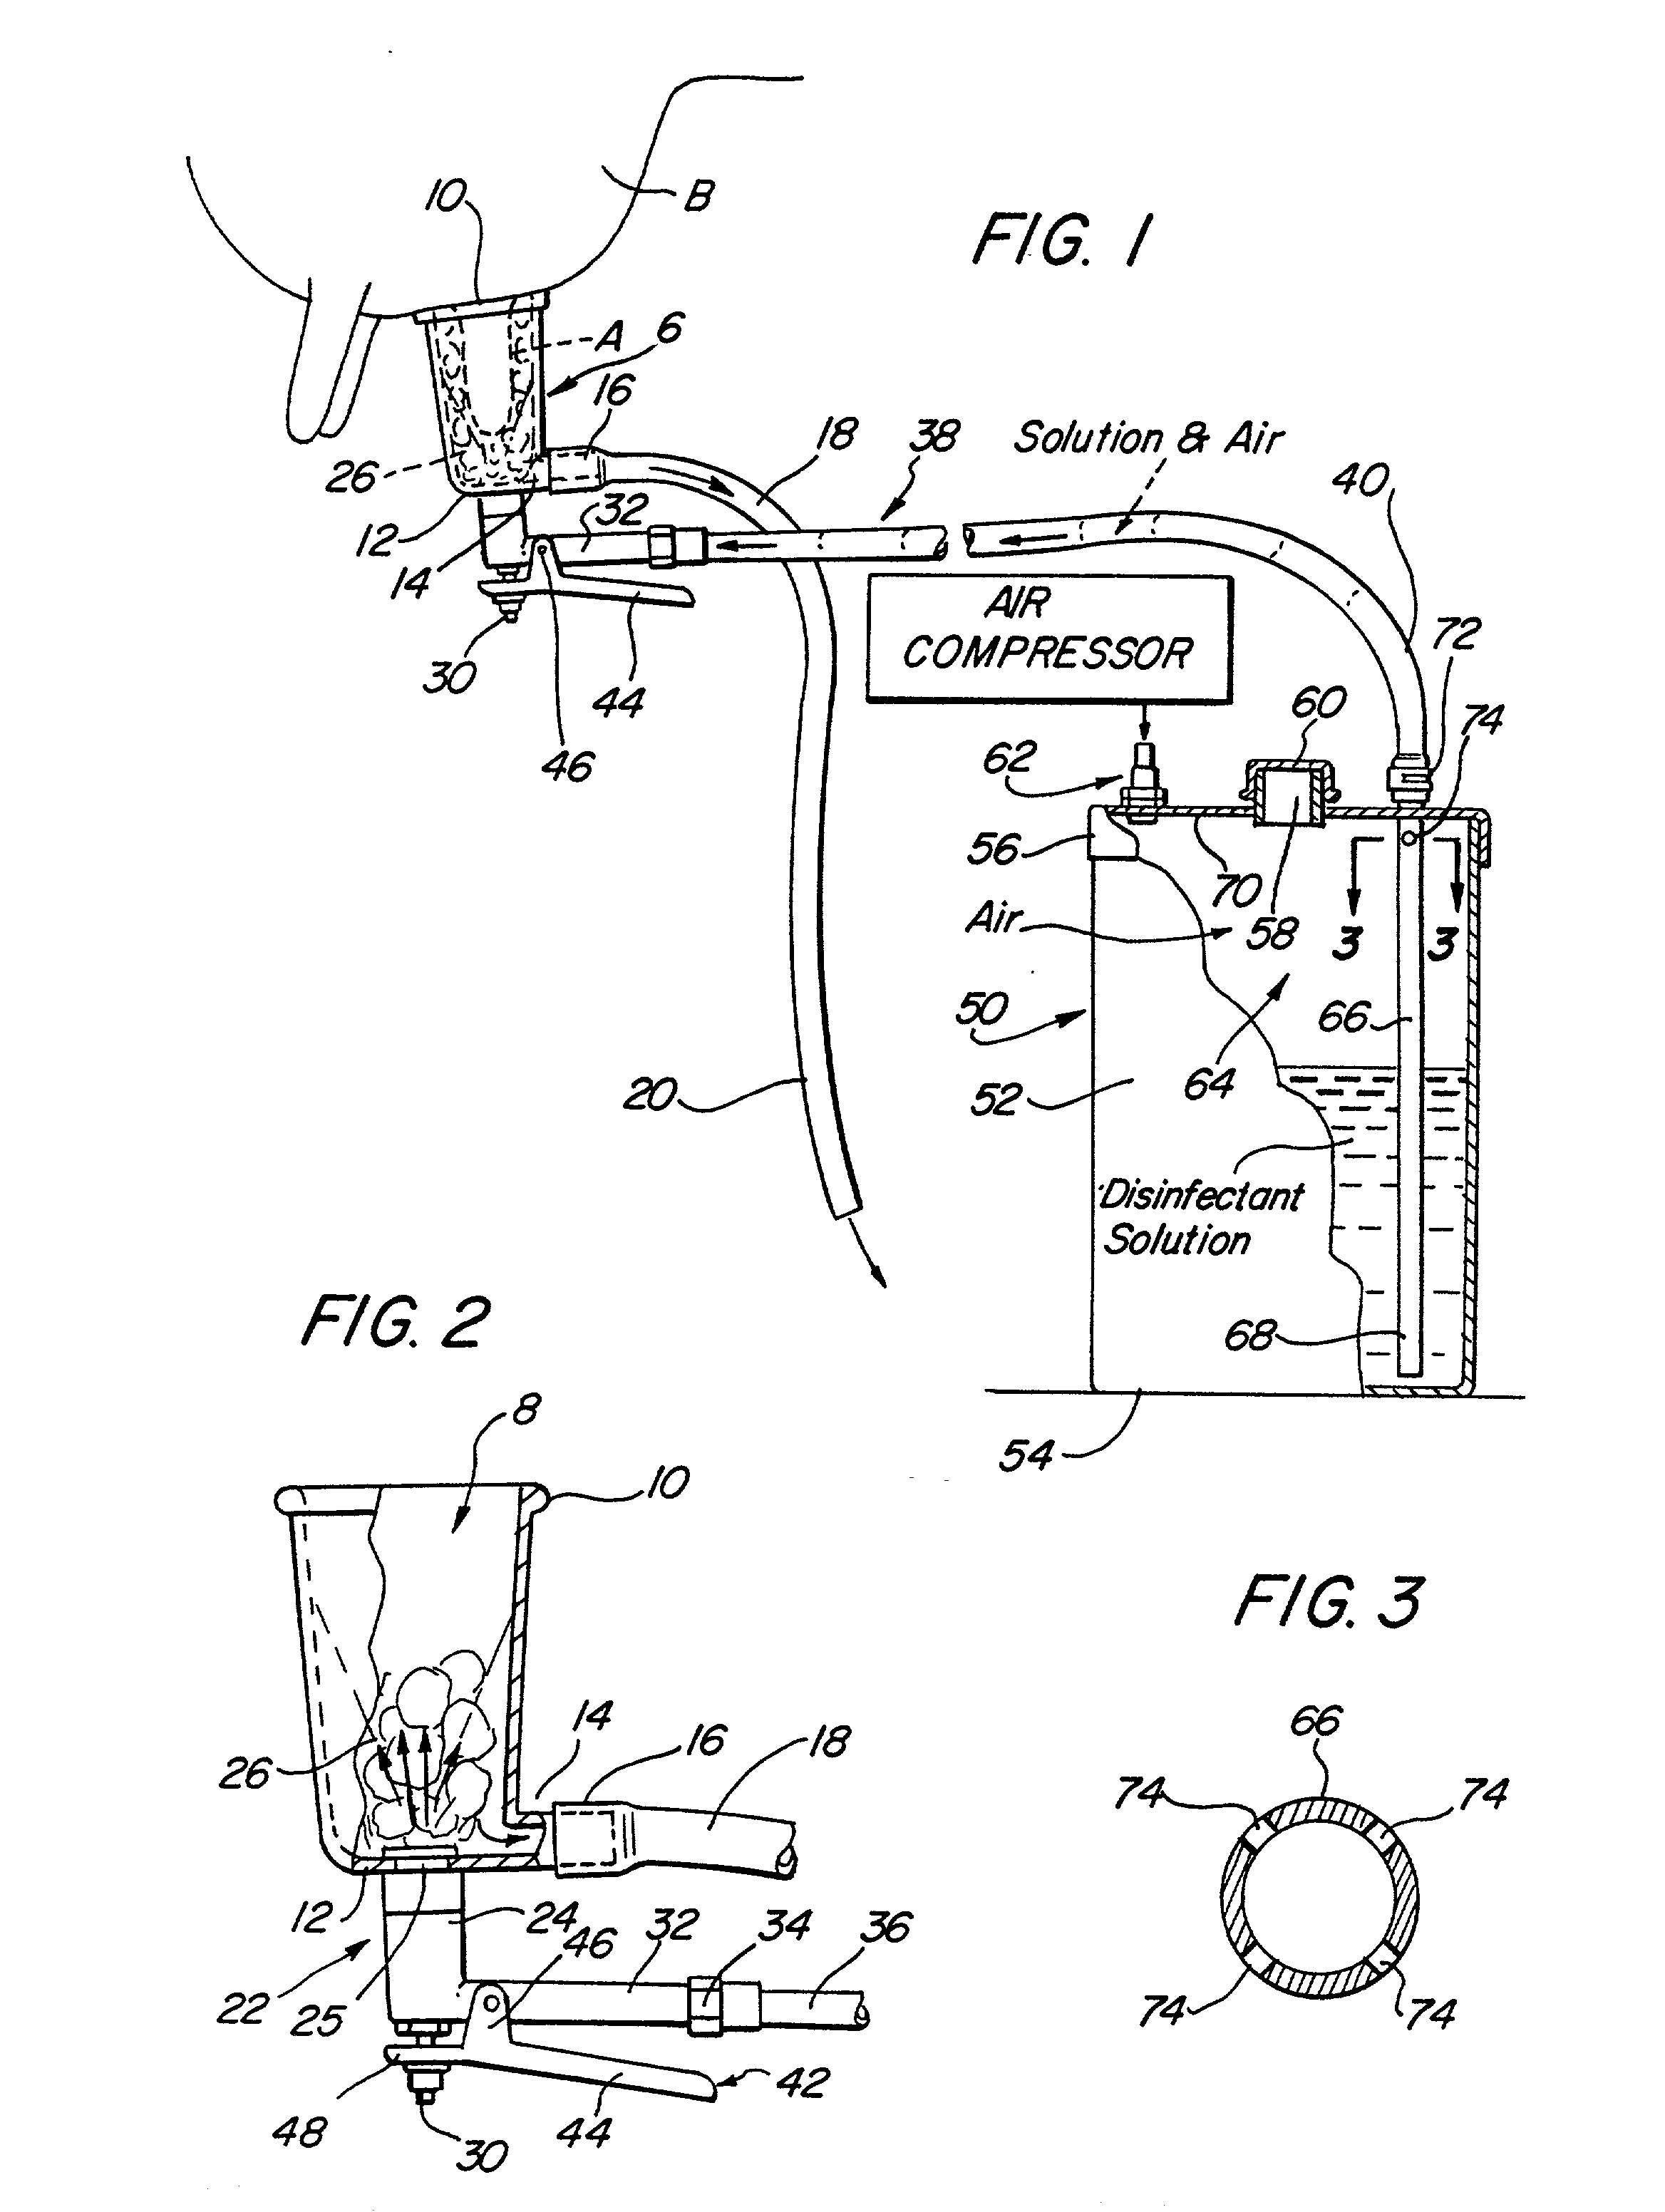 Apparatus and method for producing a foam bovine teat dip